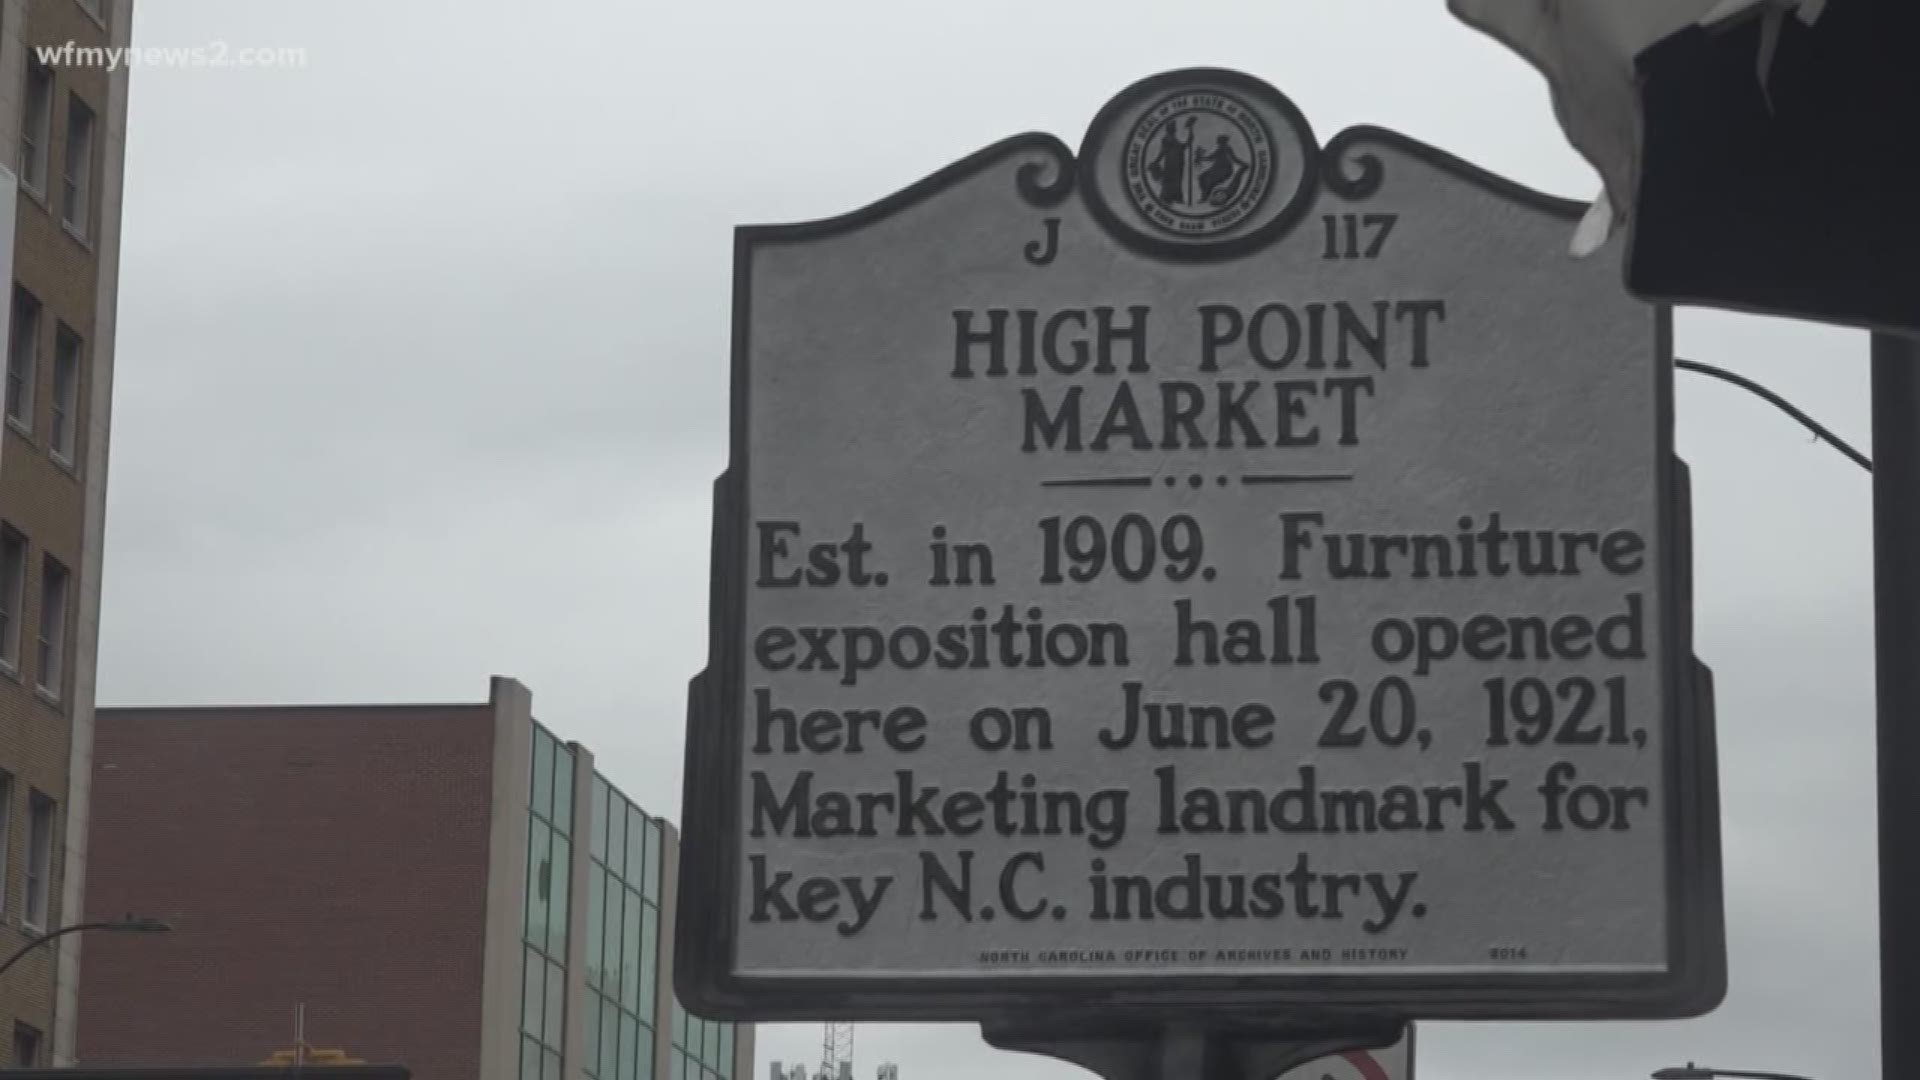 The High Point Furniture Market is popping. Here’s a look at how well the market is performing so far.